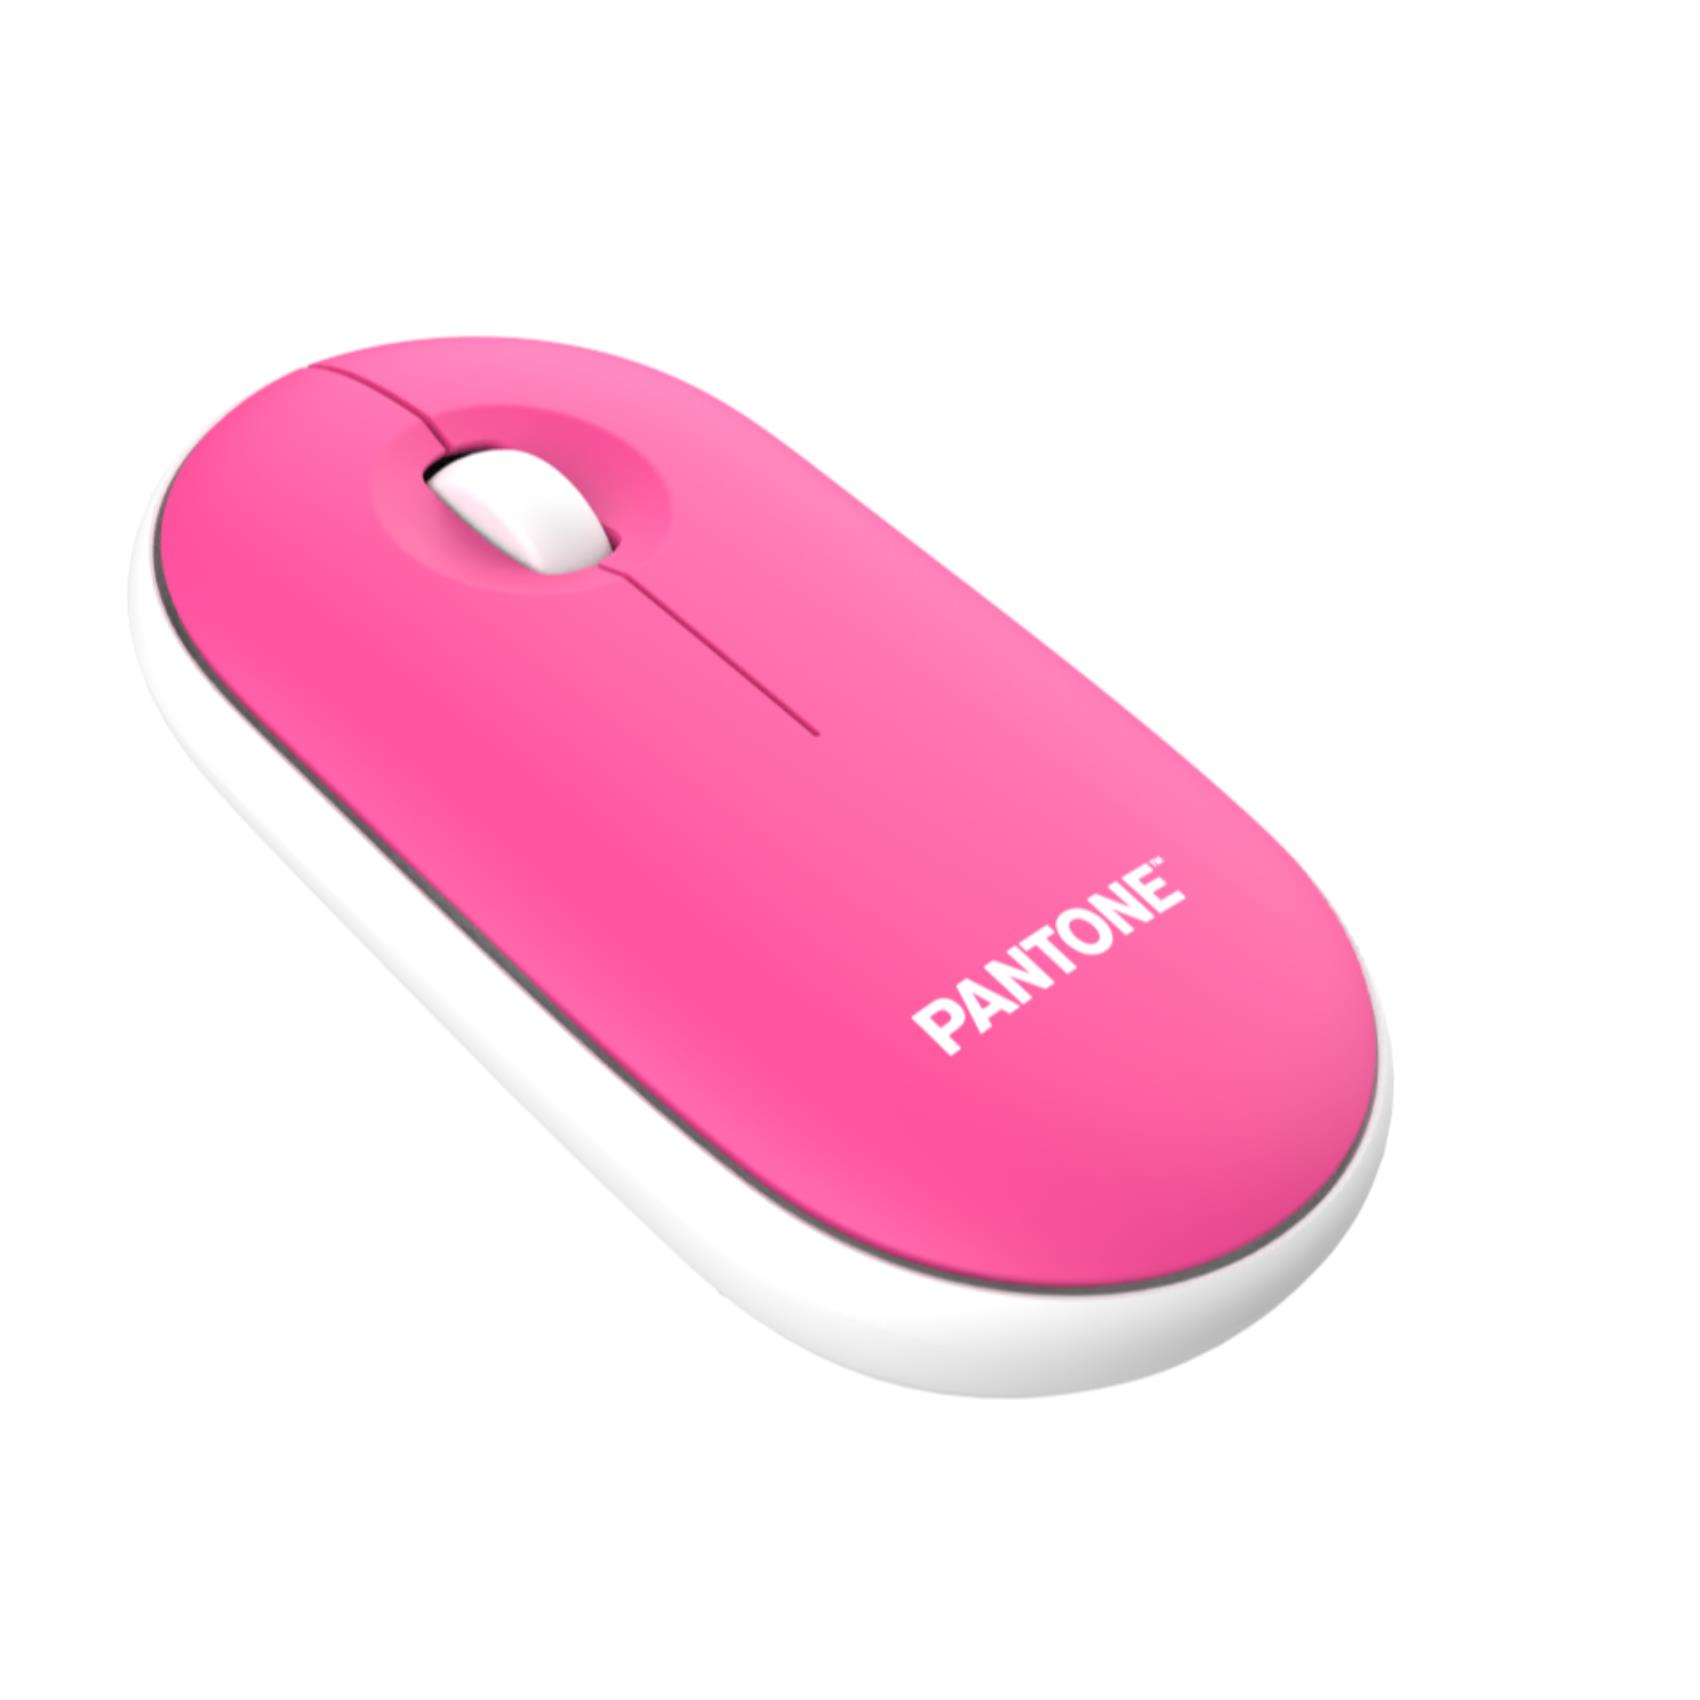 PANTONE - Mouse [IT COLLECTION] su